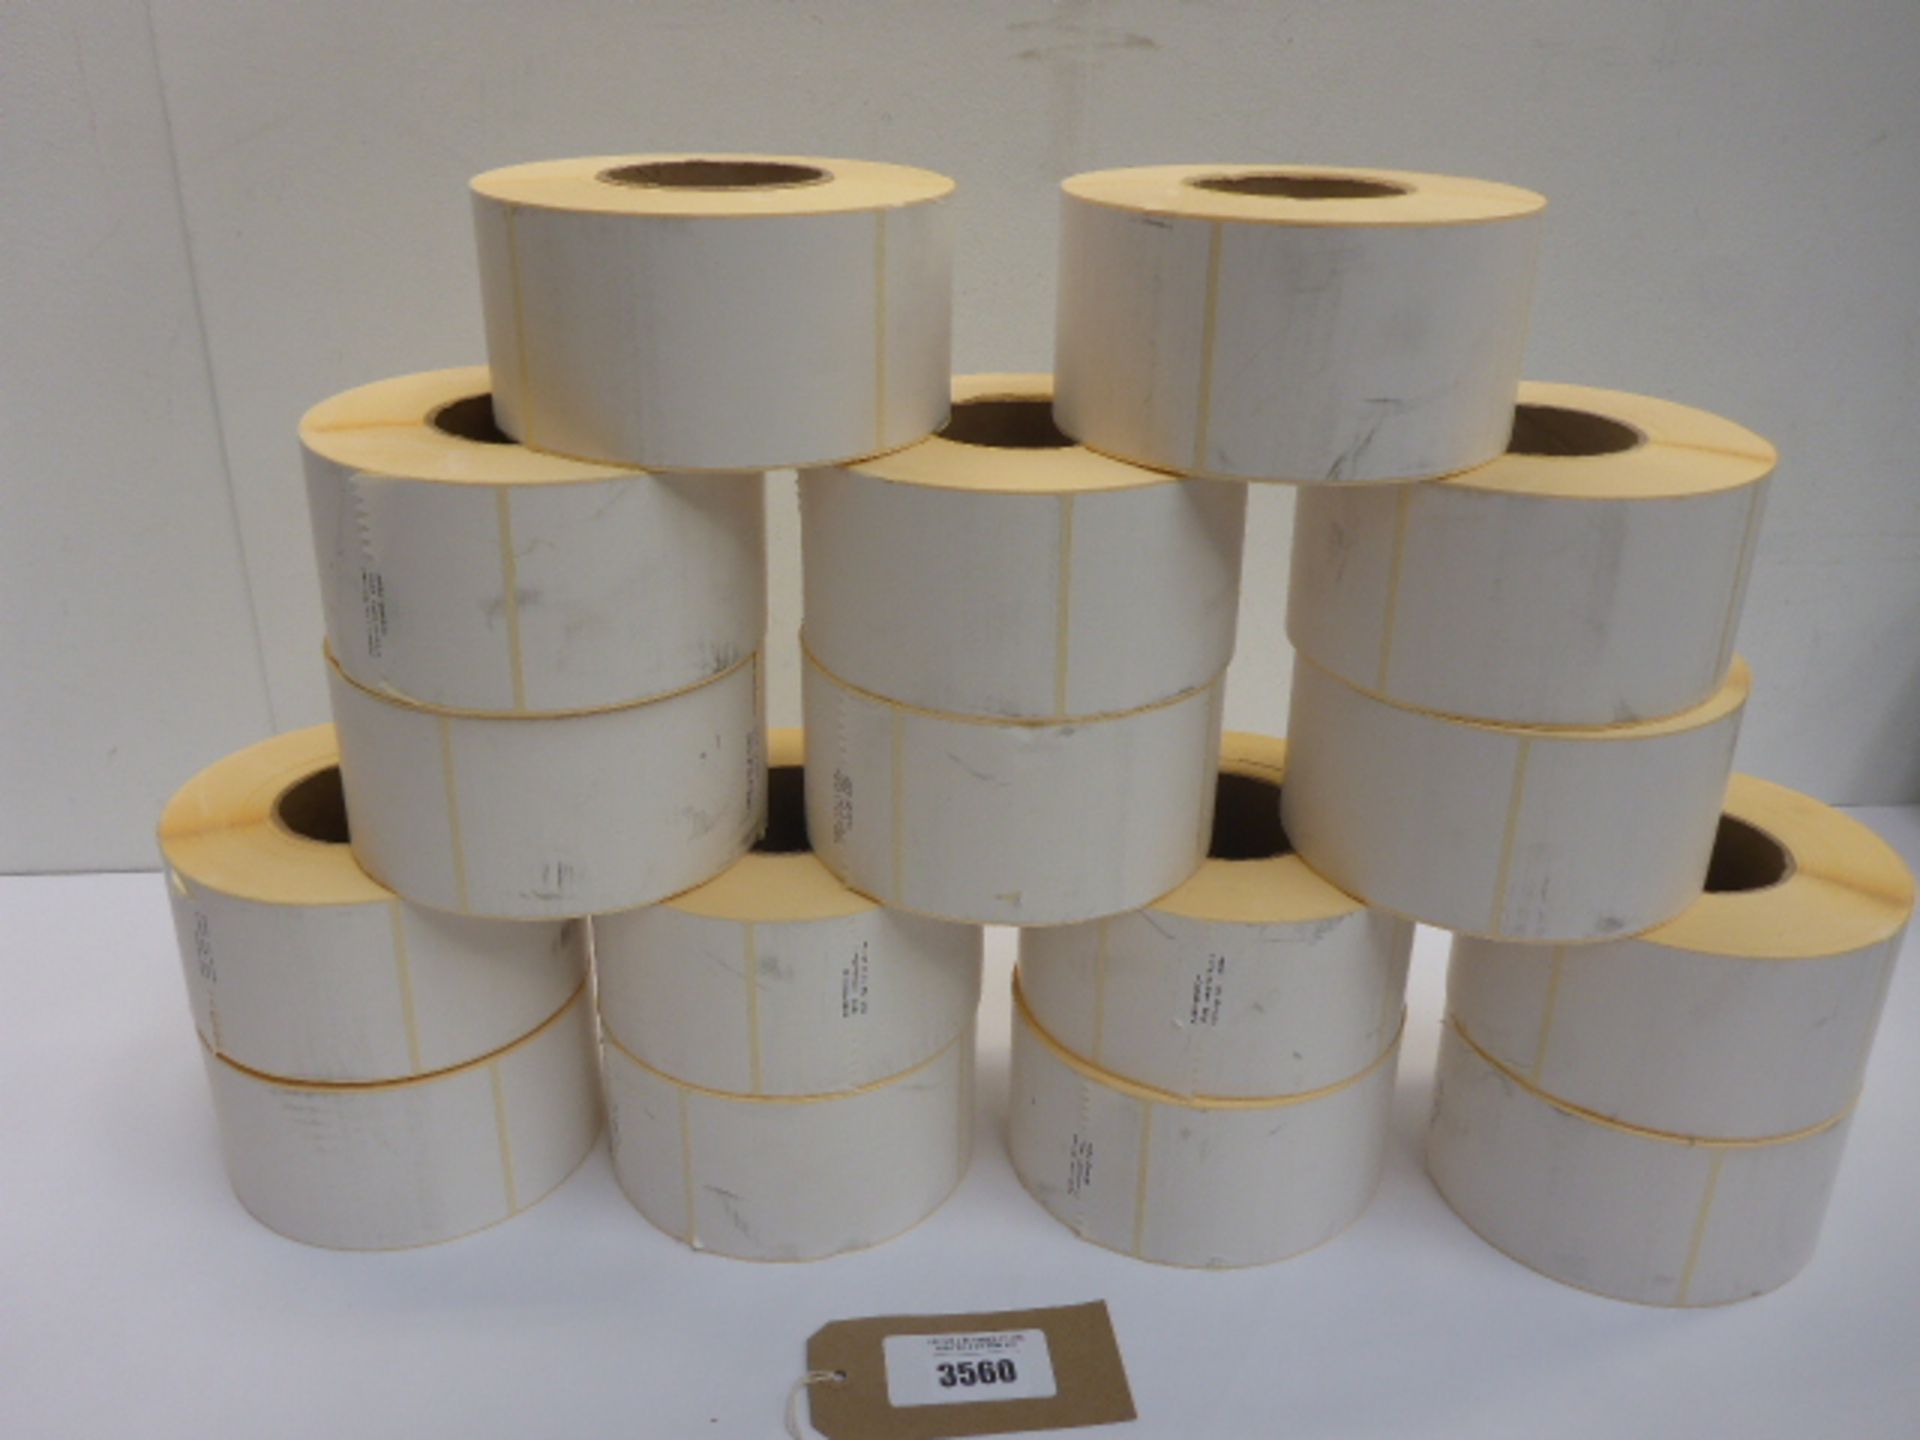 16 rolls of 1000 large self adhesive labels